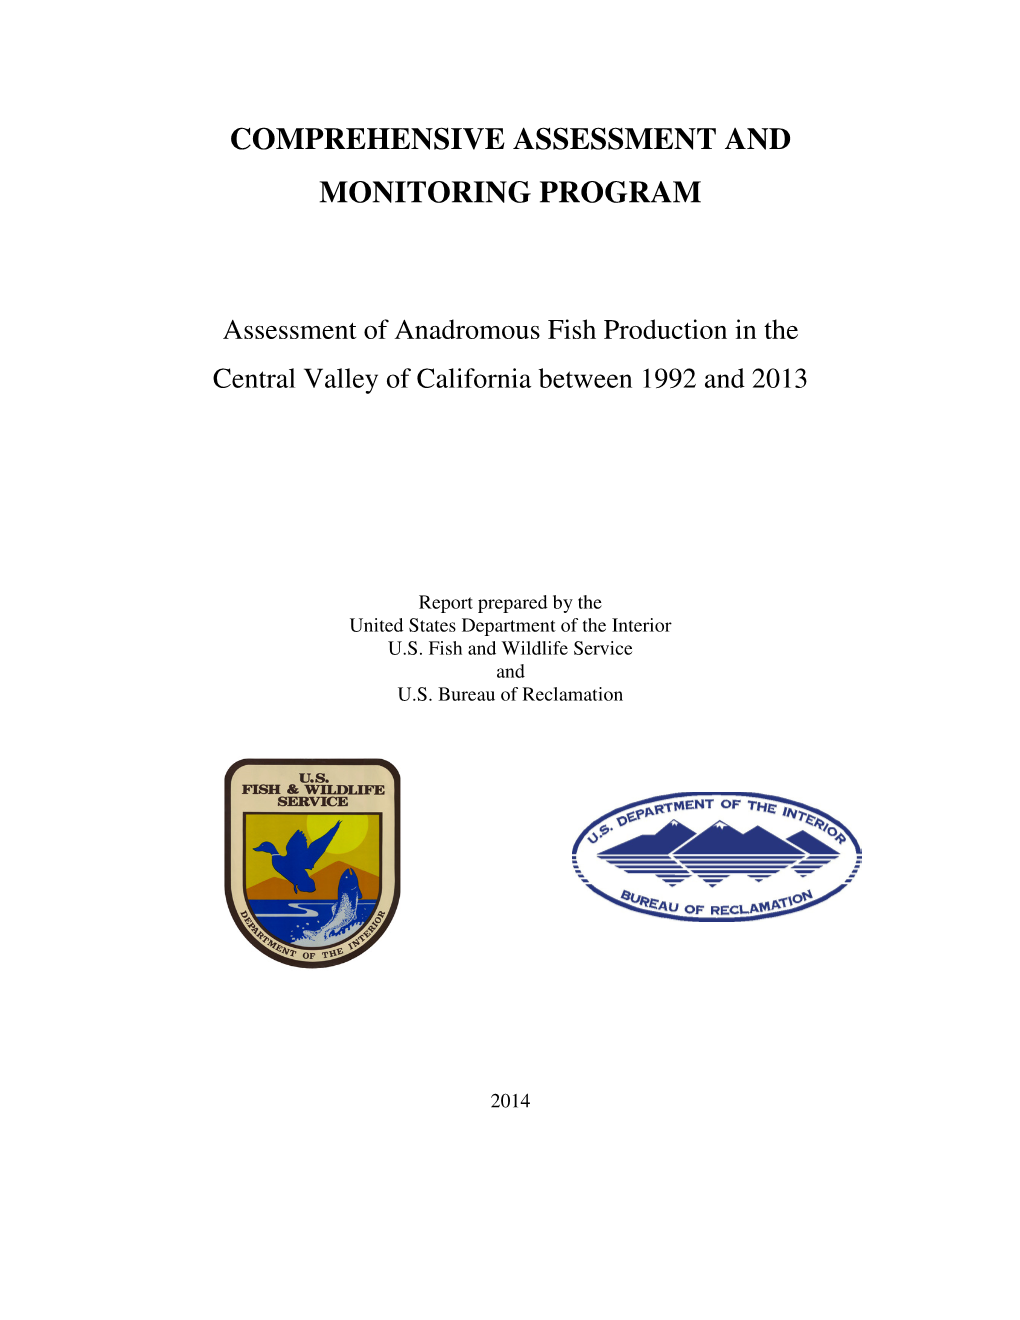 Comprehensive Assessment and Monitoring Program